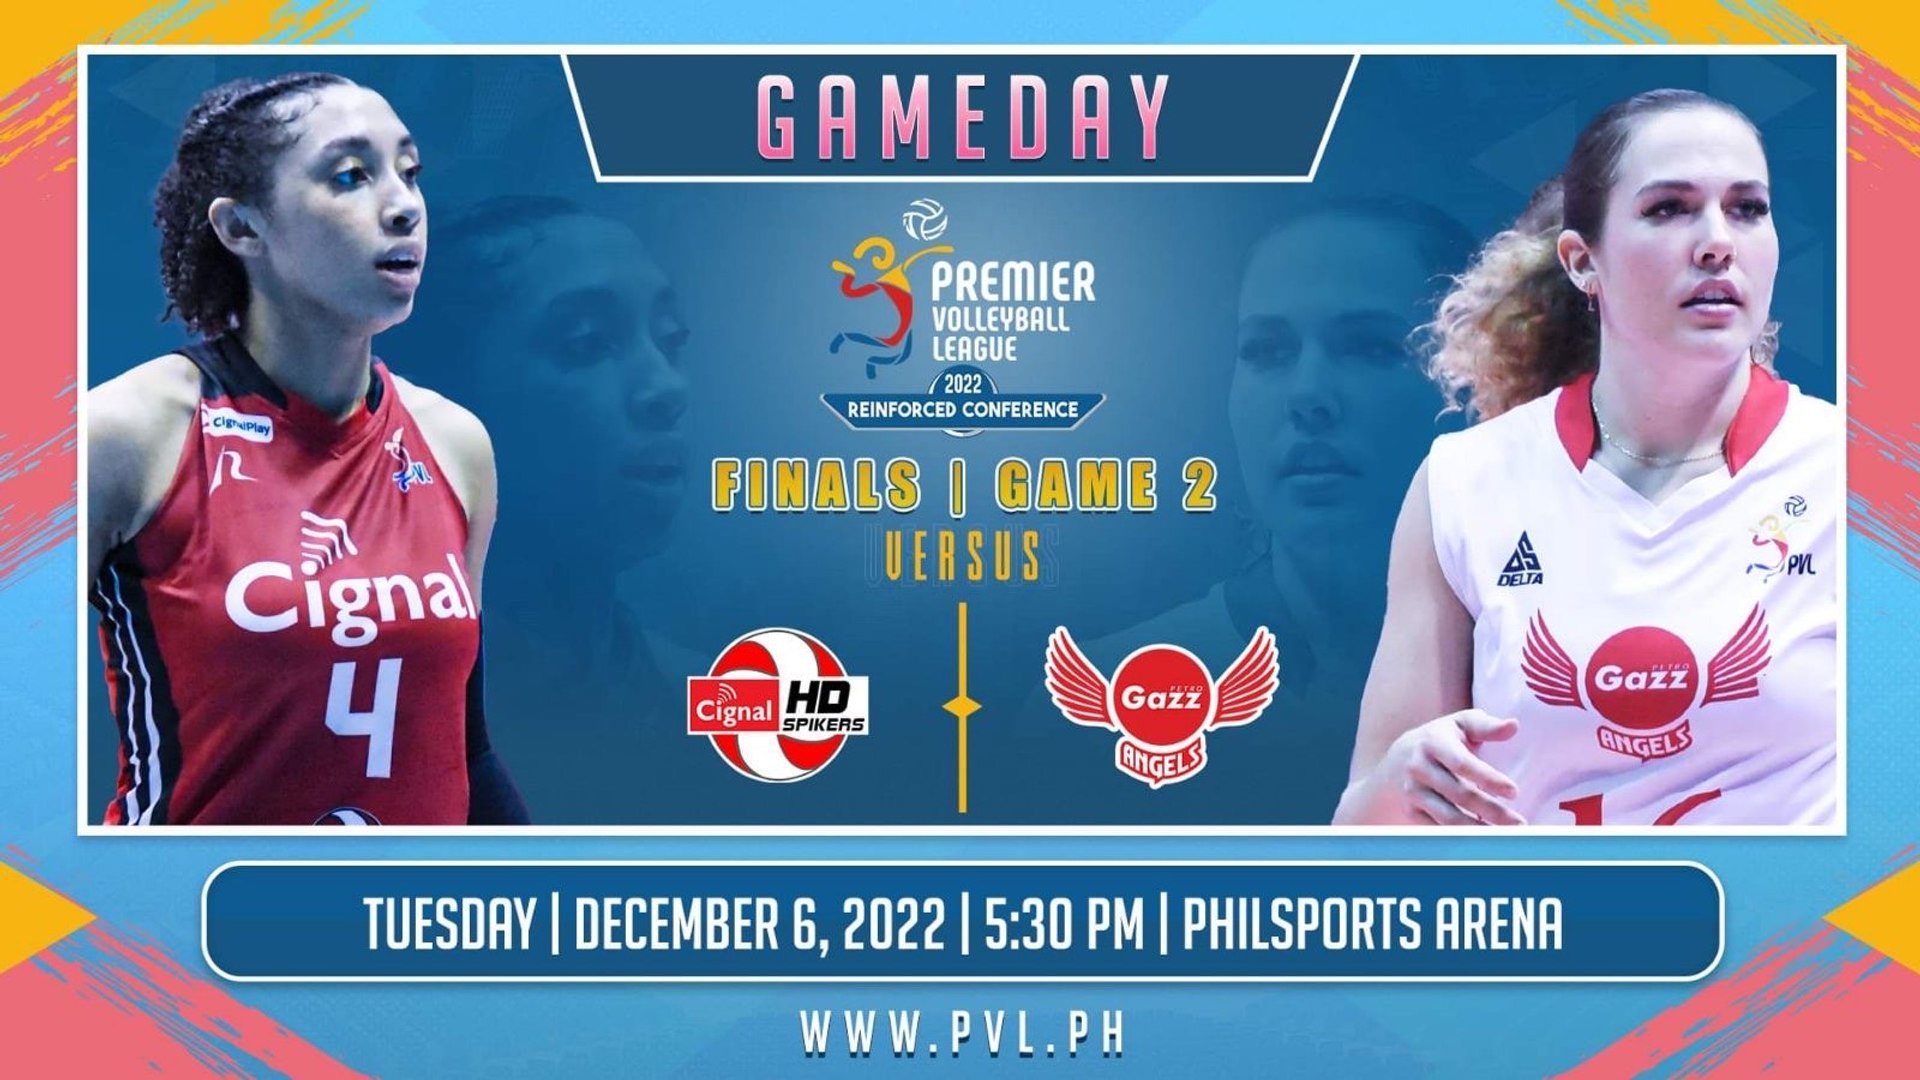 GAME 2 DECEMBER 06, 2022 CIGNAL HD SPIKERS vs PETRO GAZZ ANGELS FINALS GAME 2 2022 PVL REINFORCED CONFERENCE